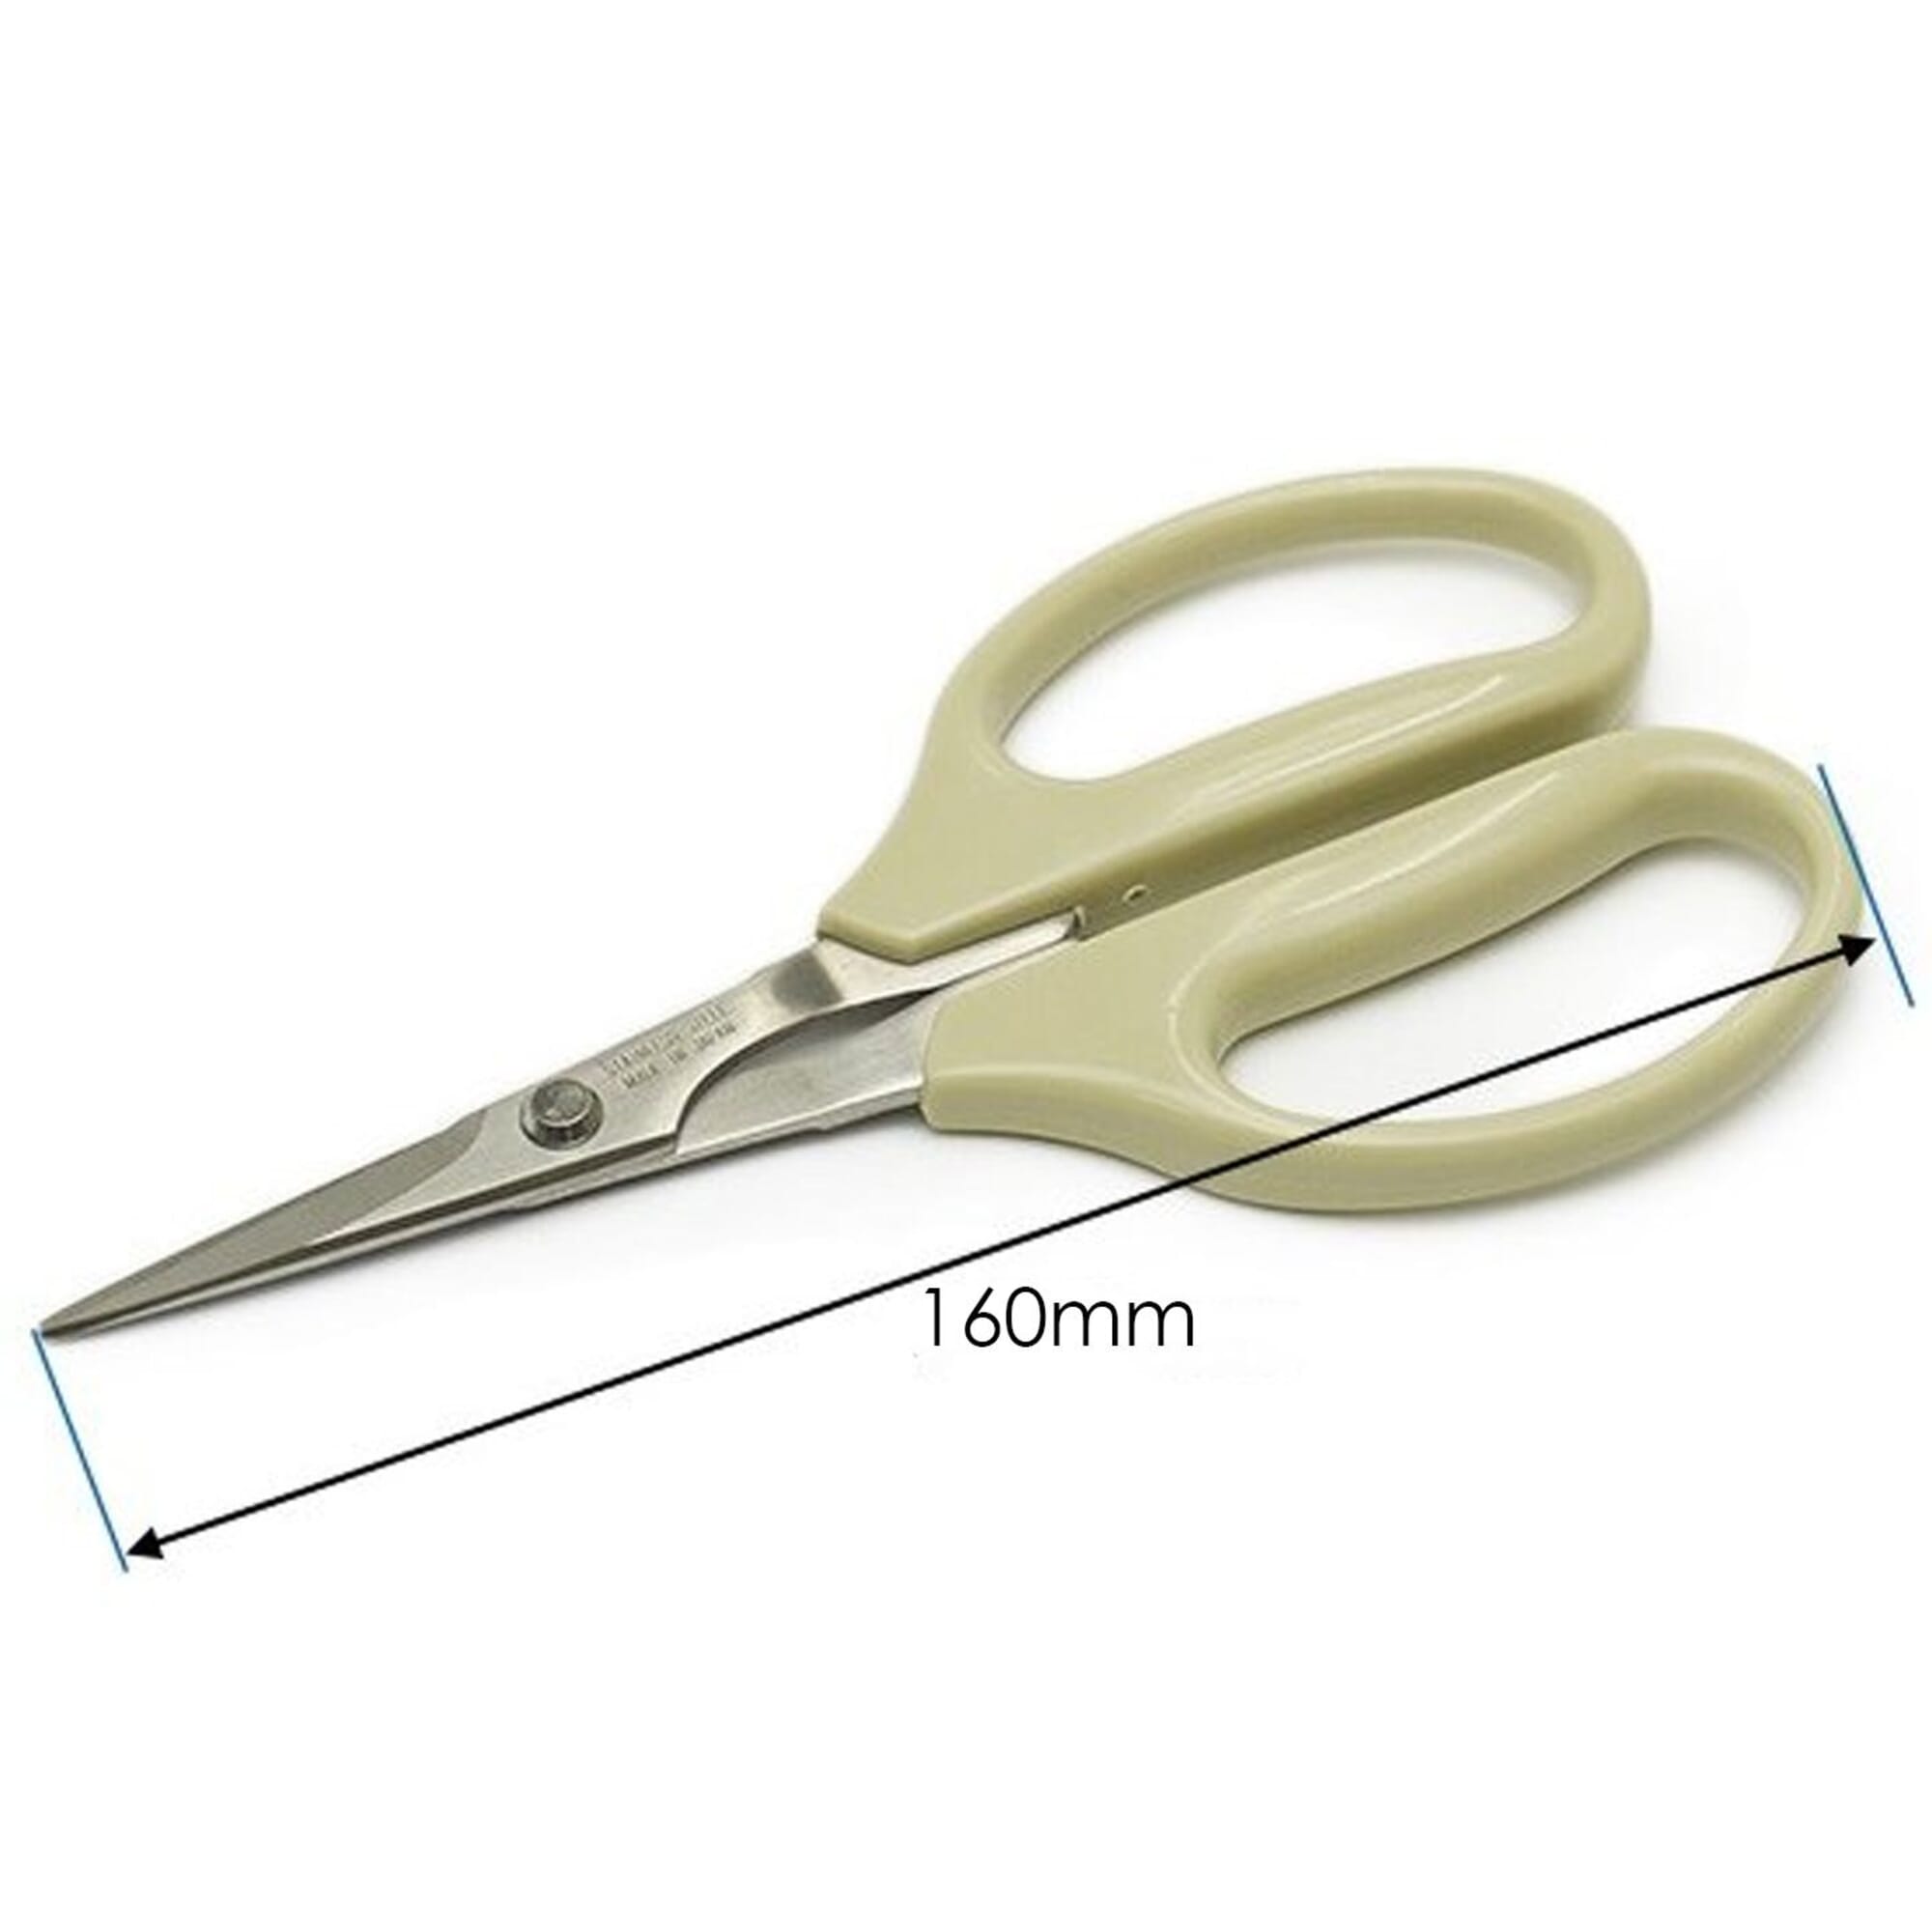 https://goodsjapan.sirv.com/item/images/42937/full/Leather-craft-tool-scissors---2-.jpg?scale.width=2000&scale.height=2000